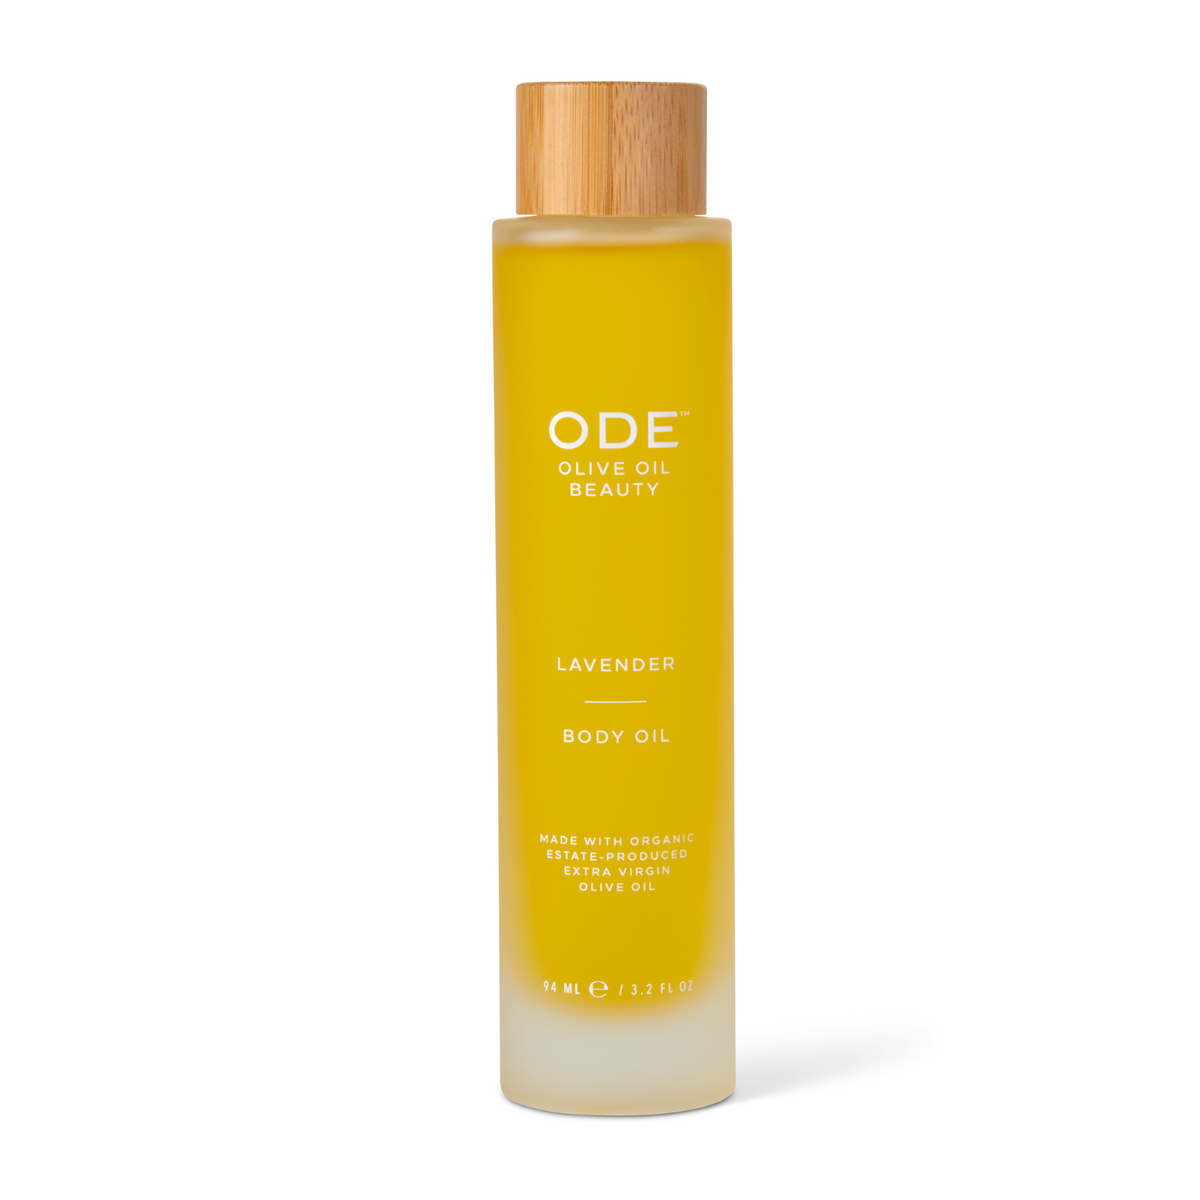 display_different_collection|ode-olive-oil-beauty-scents-lavedner